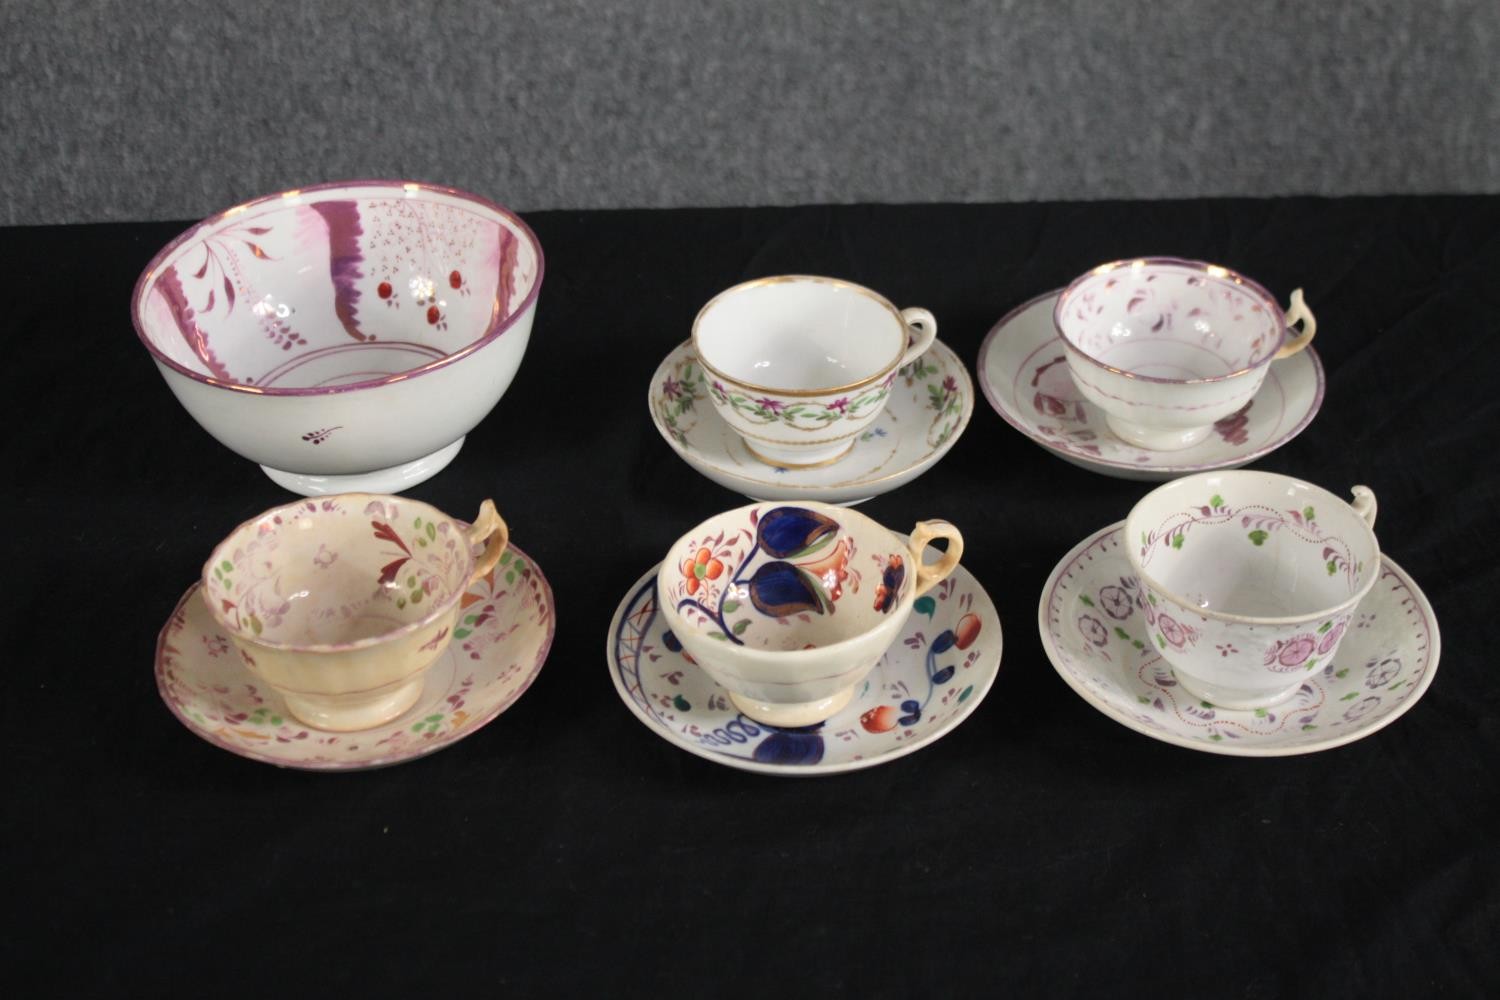 A collection of 19th century lustre ware tea cups and saucers and a sugar bowl. Dia.17cm. (largest)